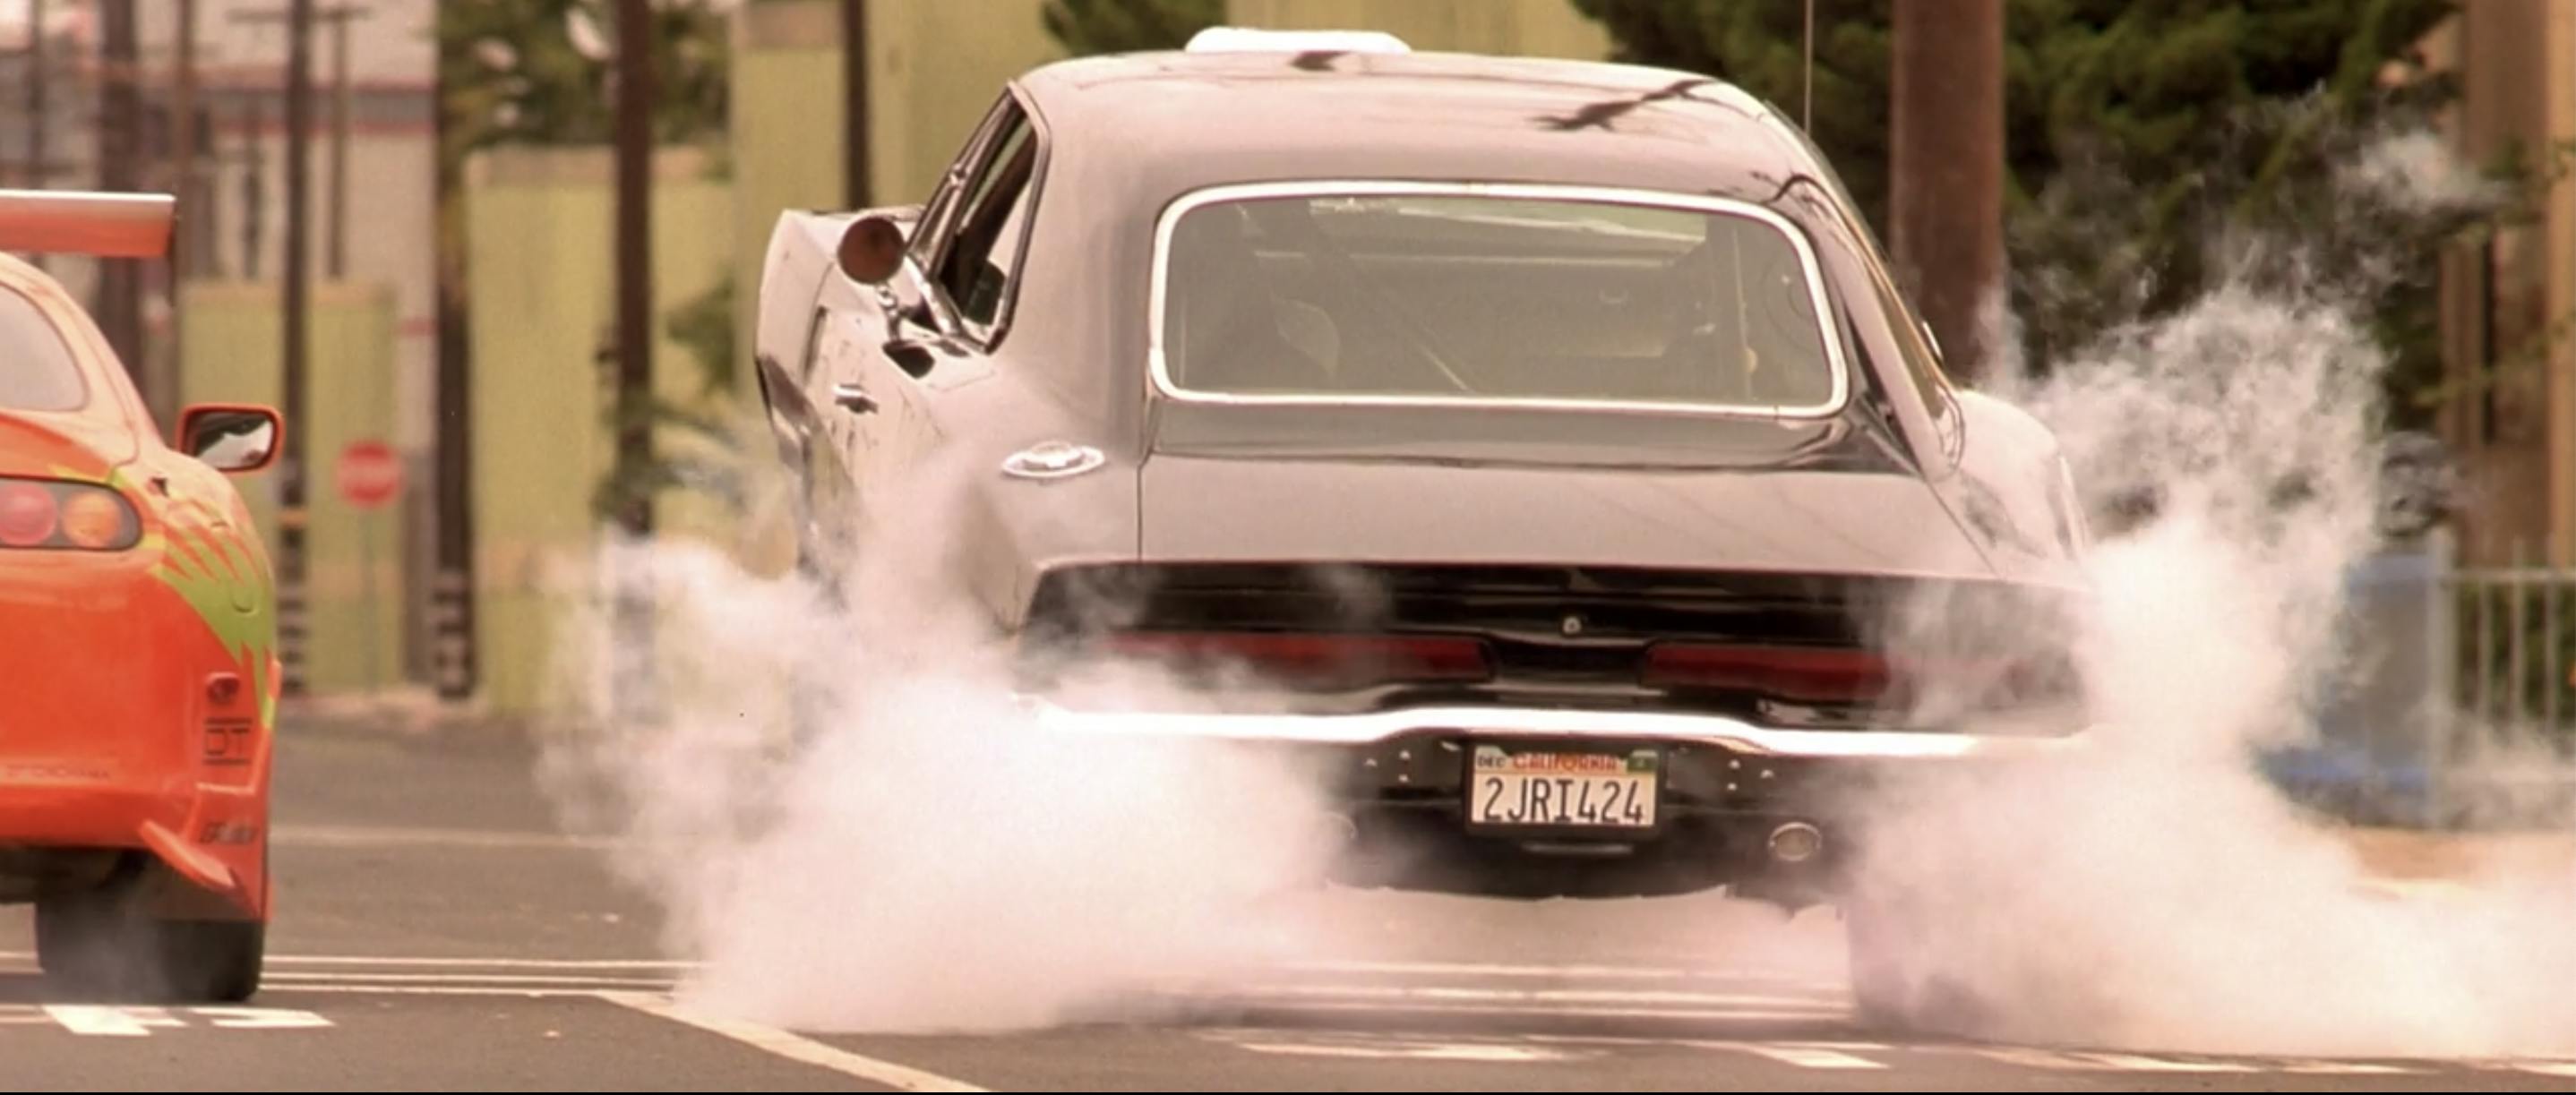 Most furious? Dom Toretto's Chargers are muscled maniacs - Hagerty Media